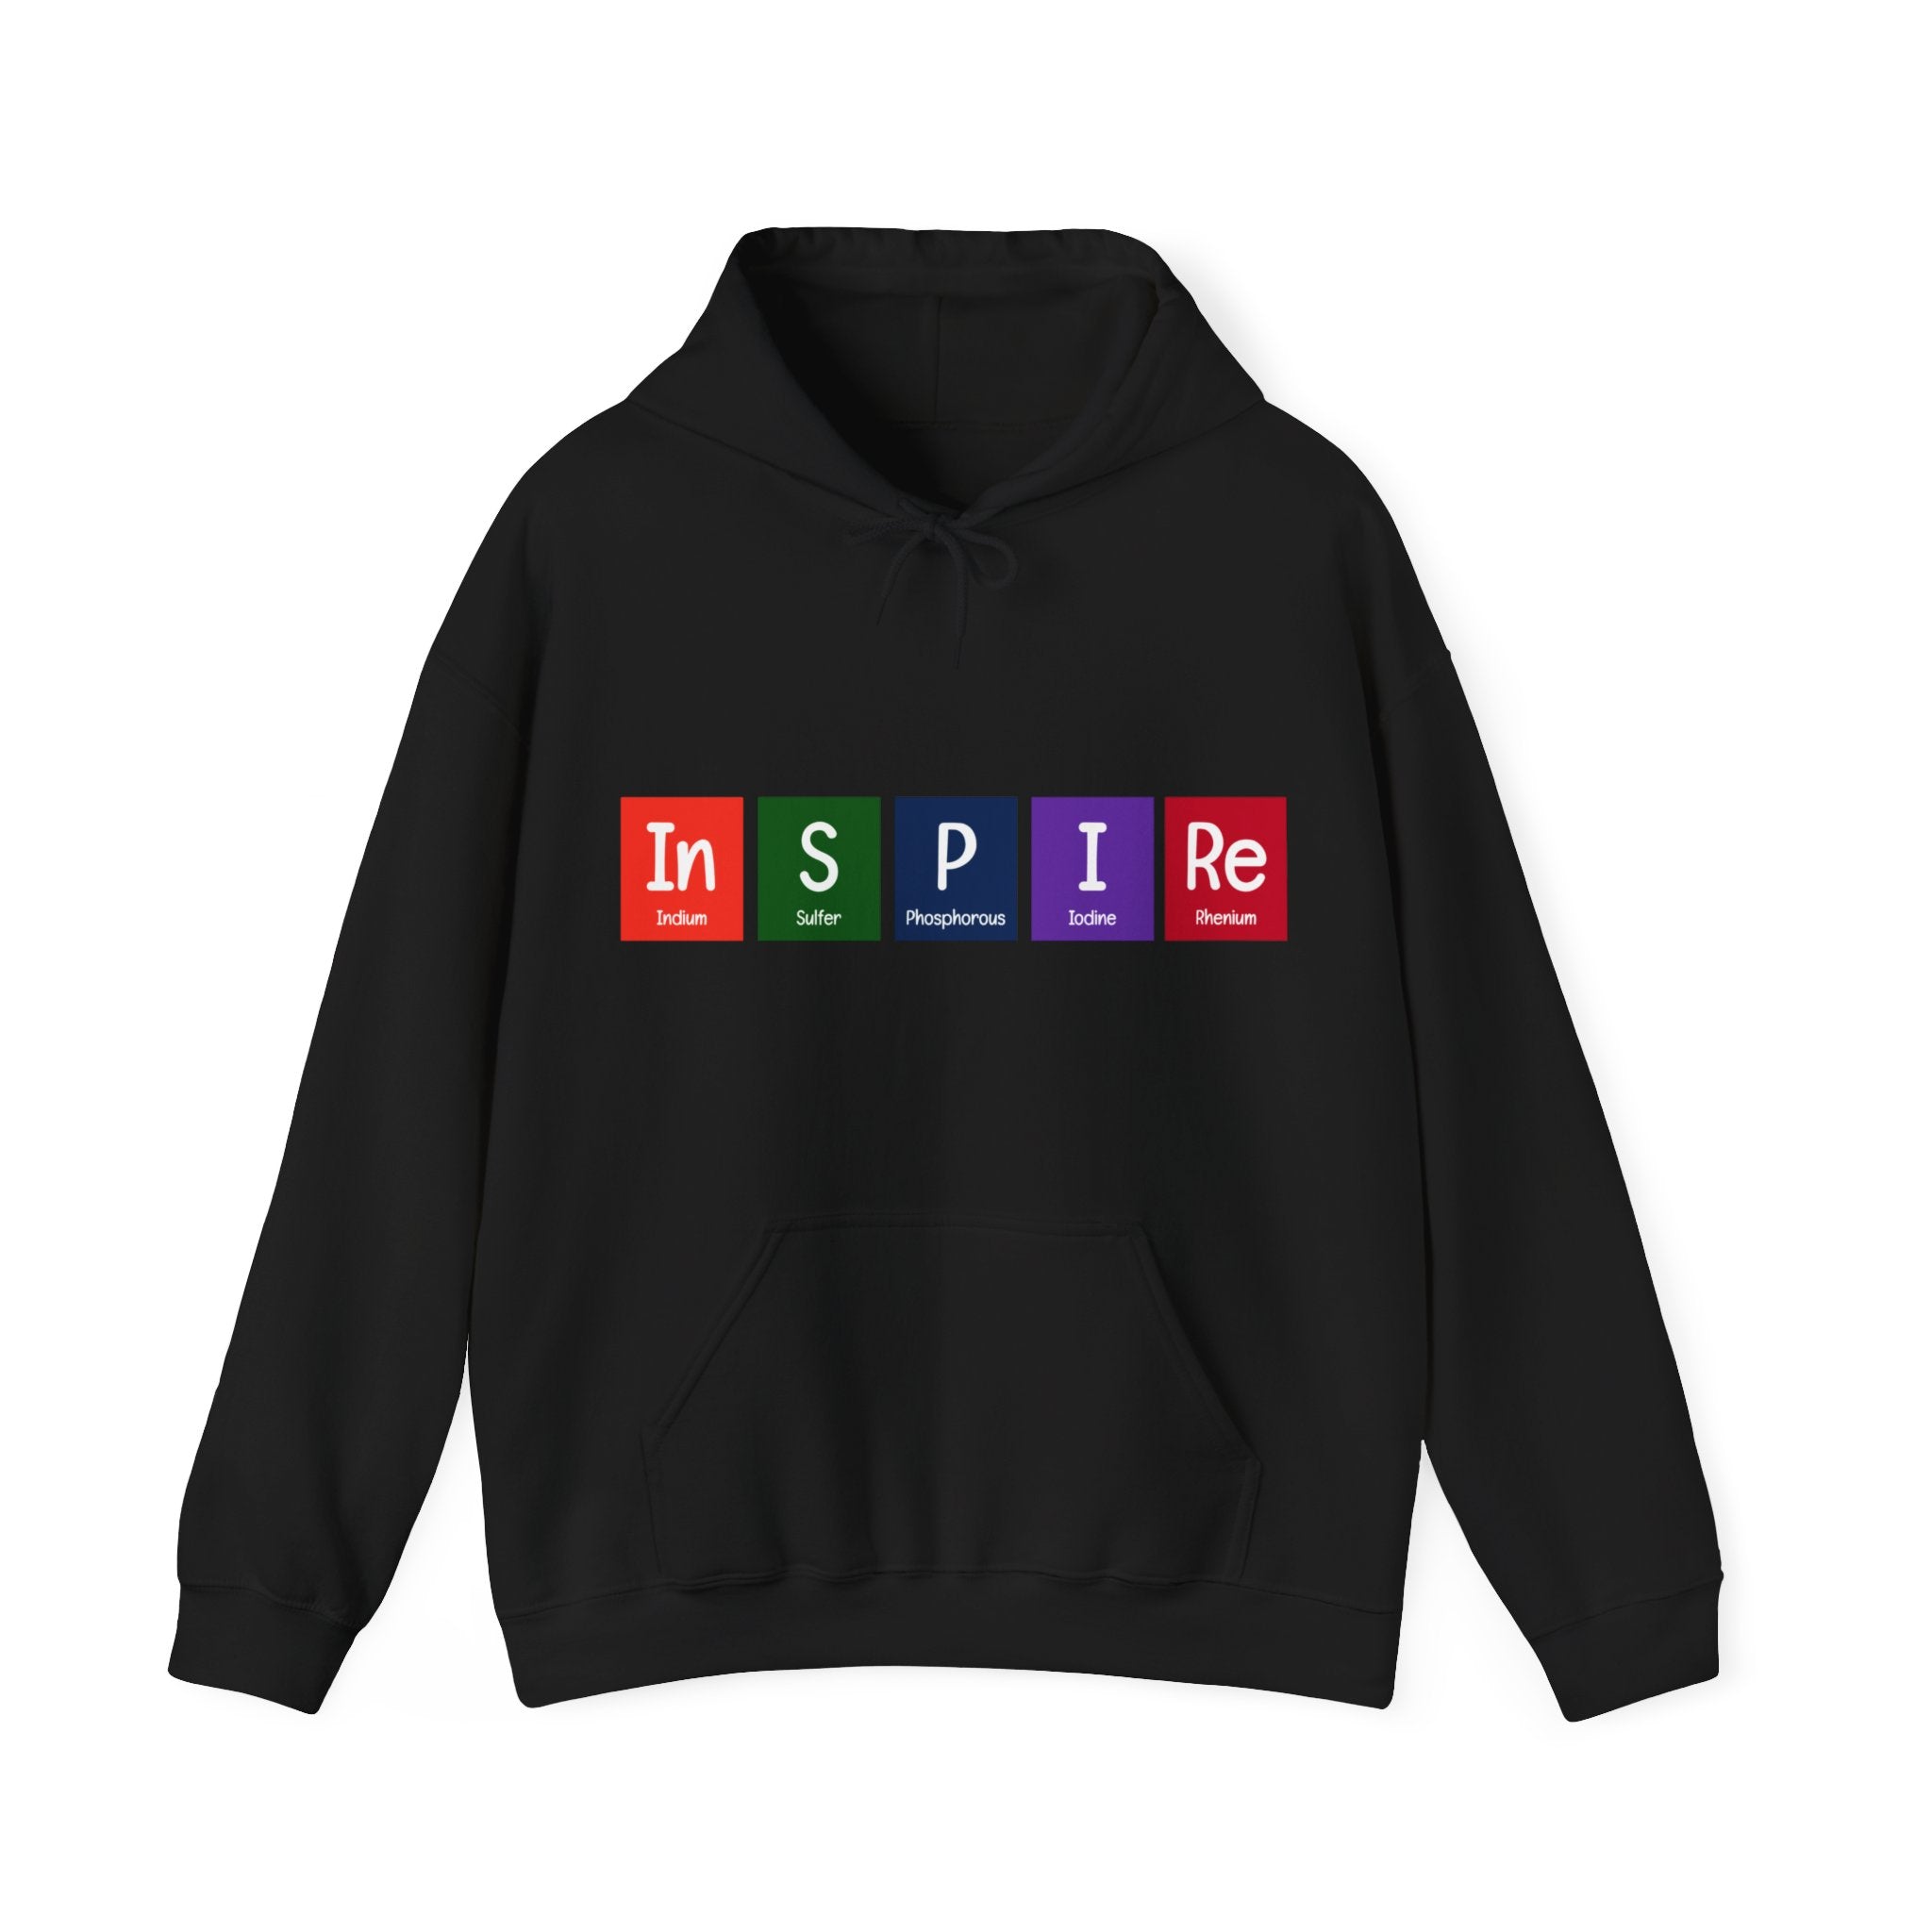 In-S-P-I-Re - Hooded Sweatshirt: Black hoodie with a periodic table design spelling out "INSPIRE" using element symbols, perfect for daily wear and incredibly comfy.